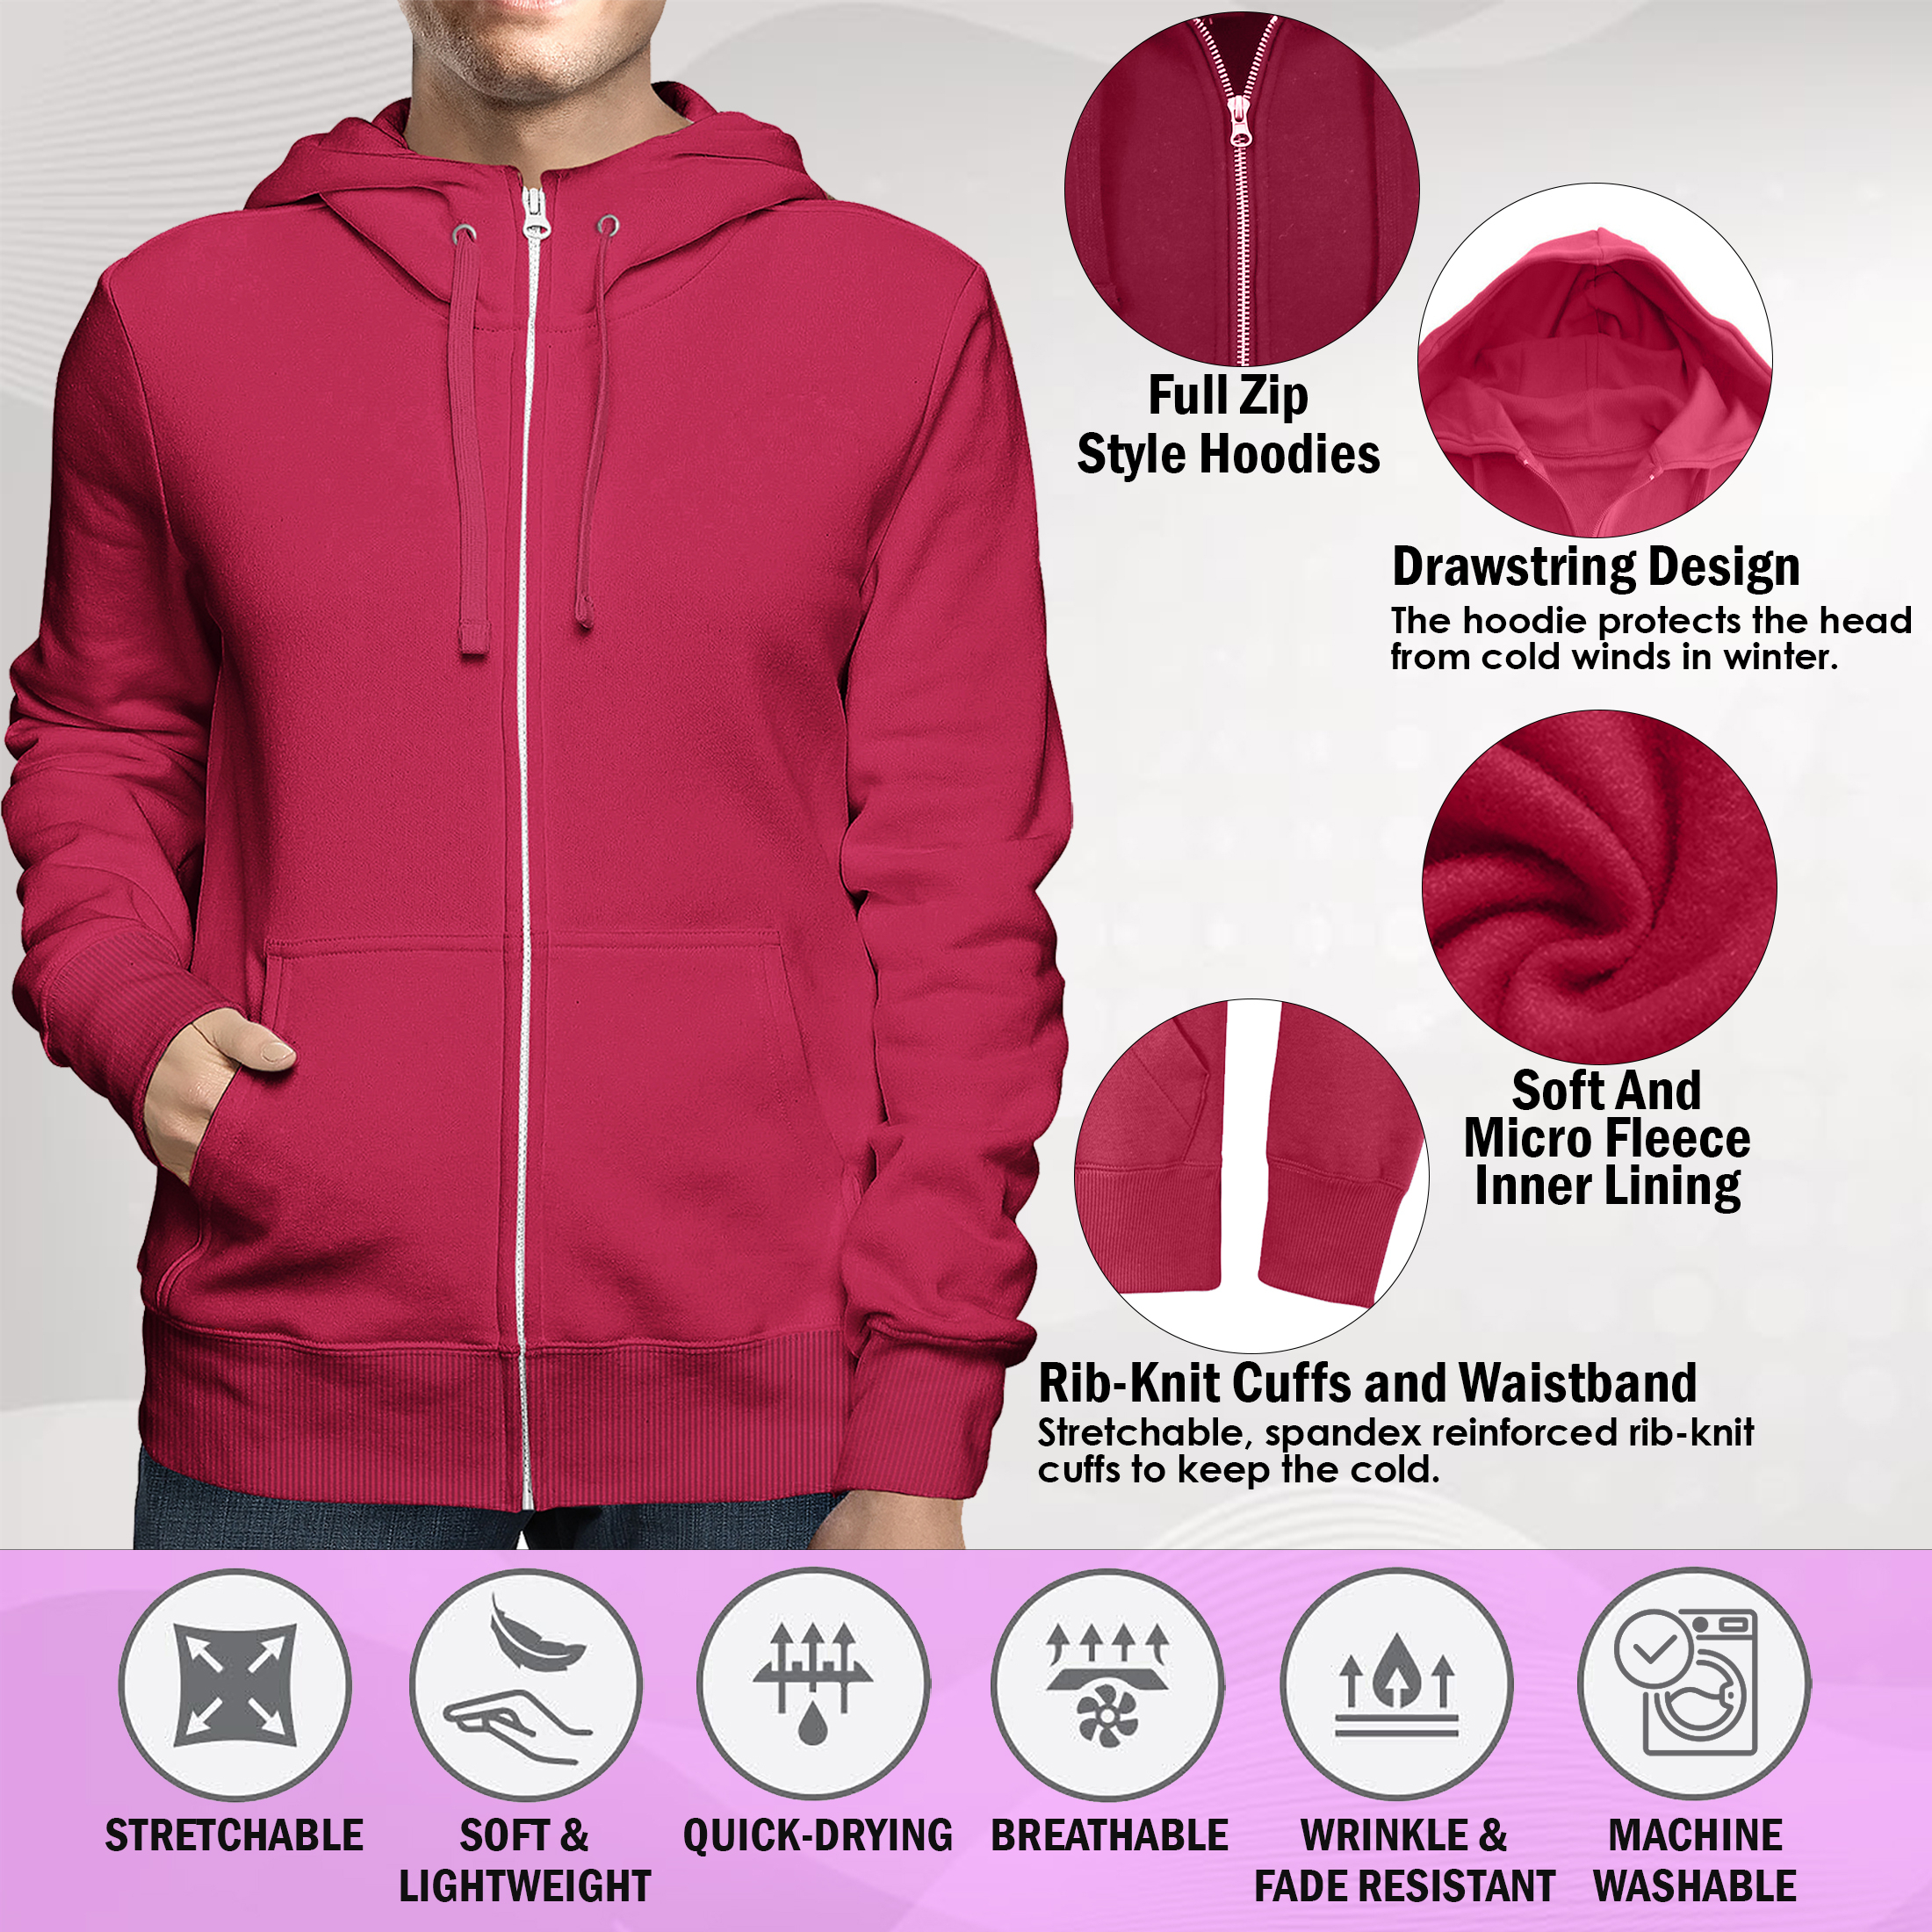 2-Pack: Men's Full Zip Up Fleece-Lined Hoodie Sweatshirt (Big & Tall Size Available) - Burgundy & Olive, X-large